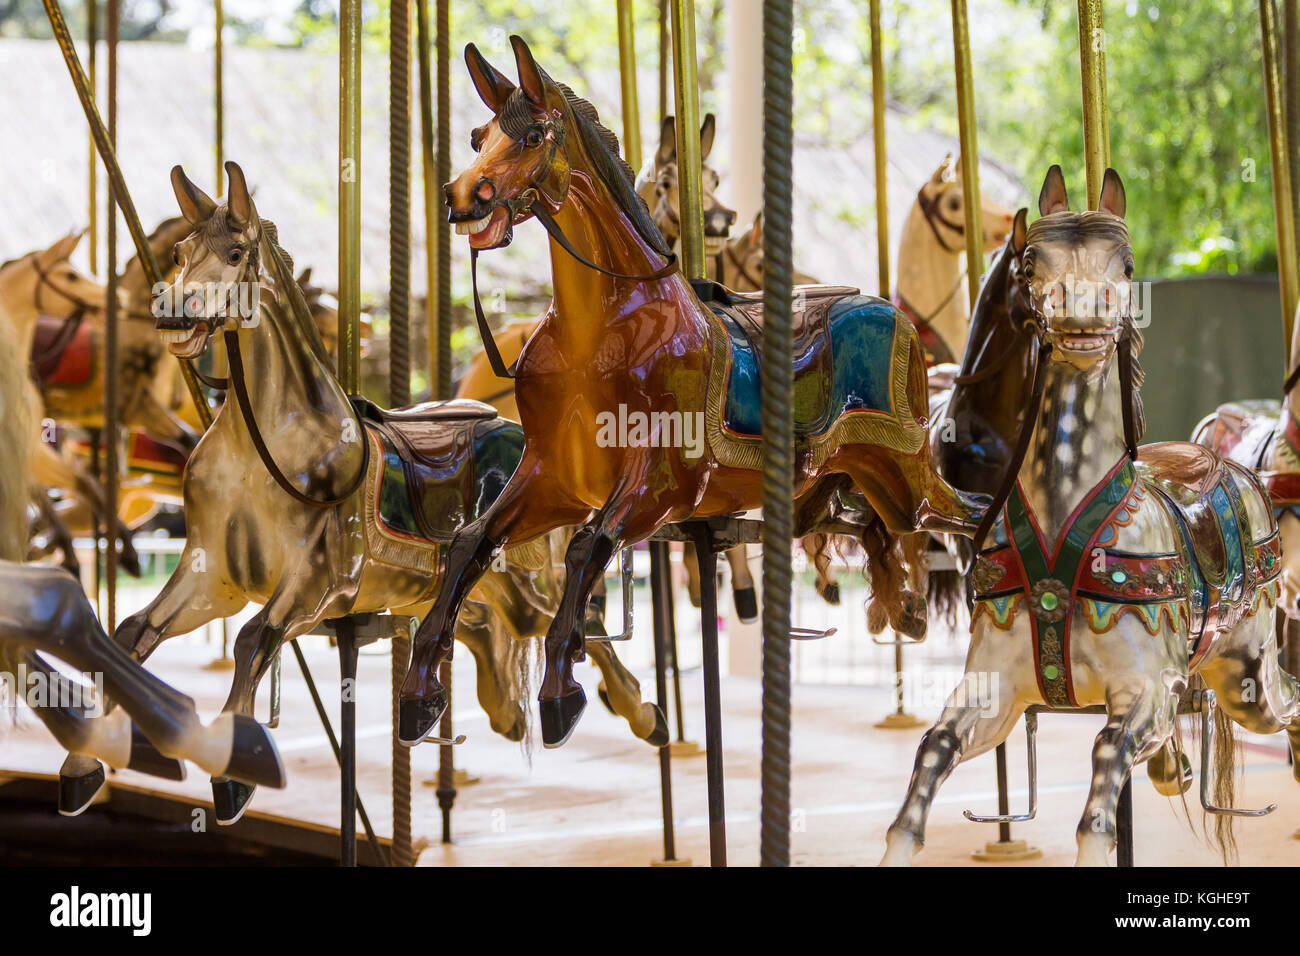 A horse merry go round ( or Carousel) Stock Photo